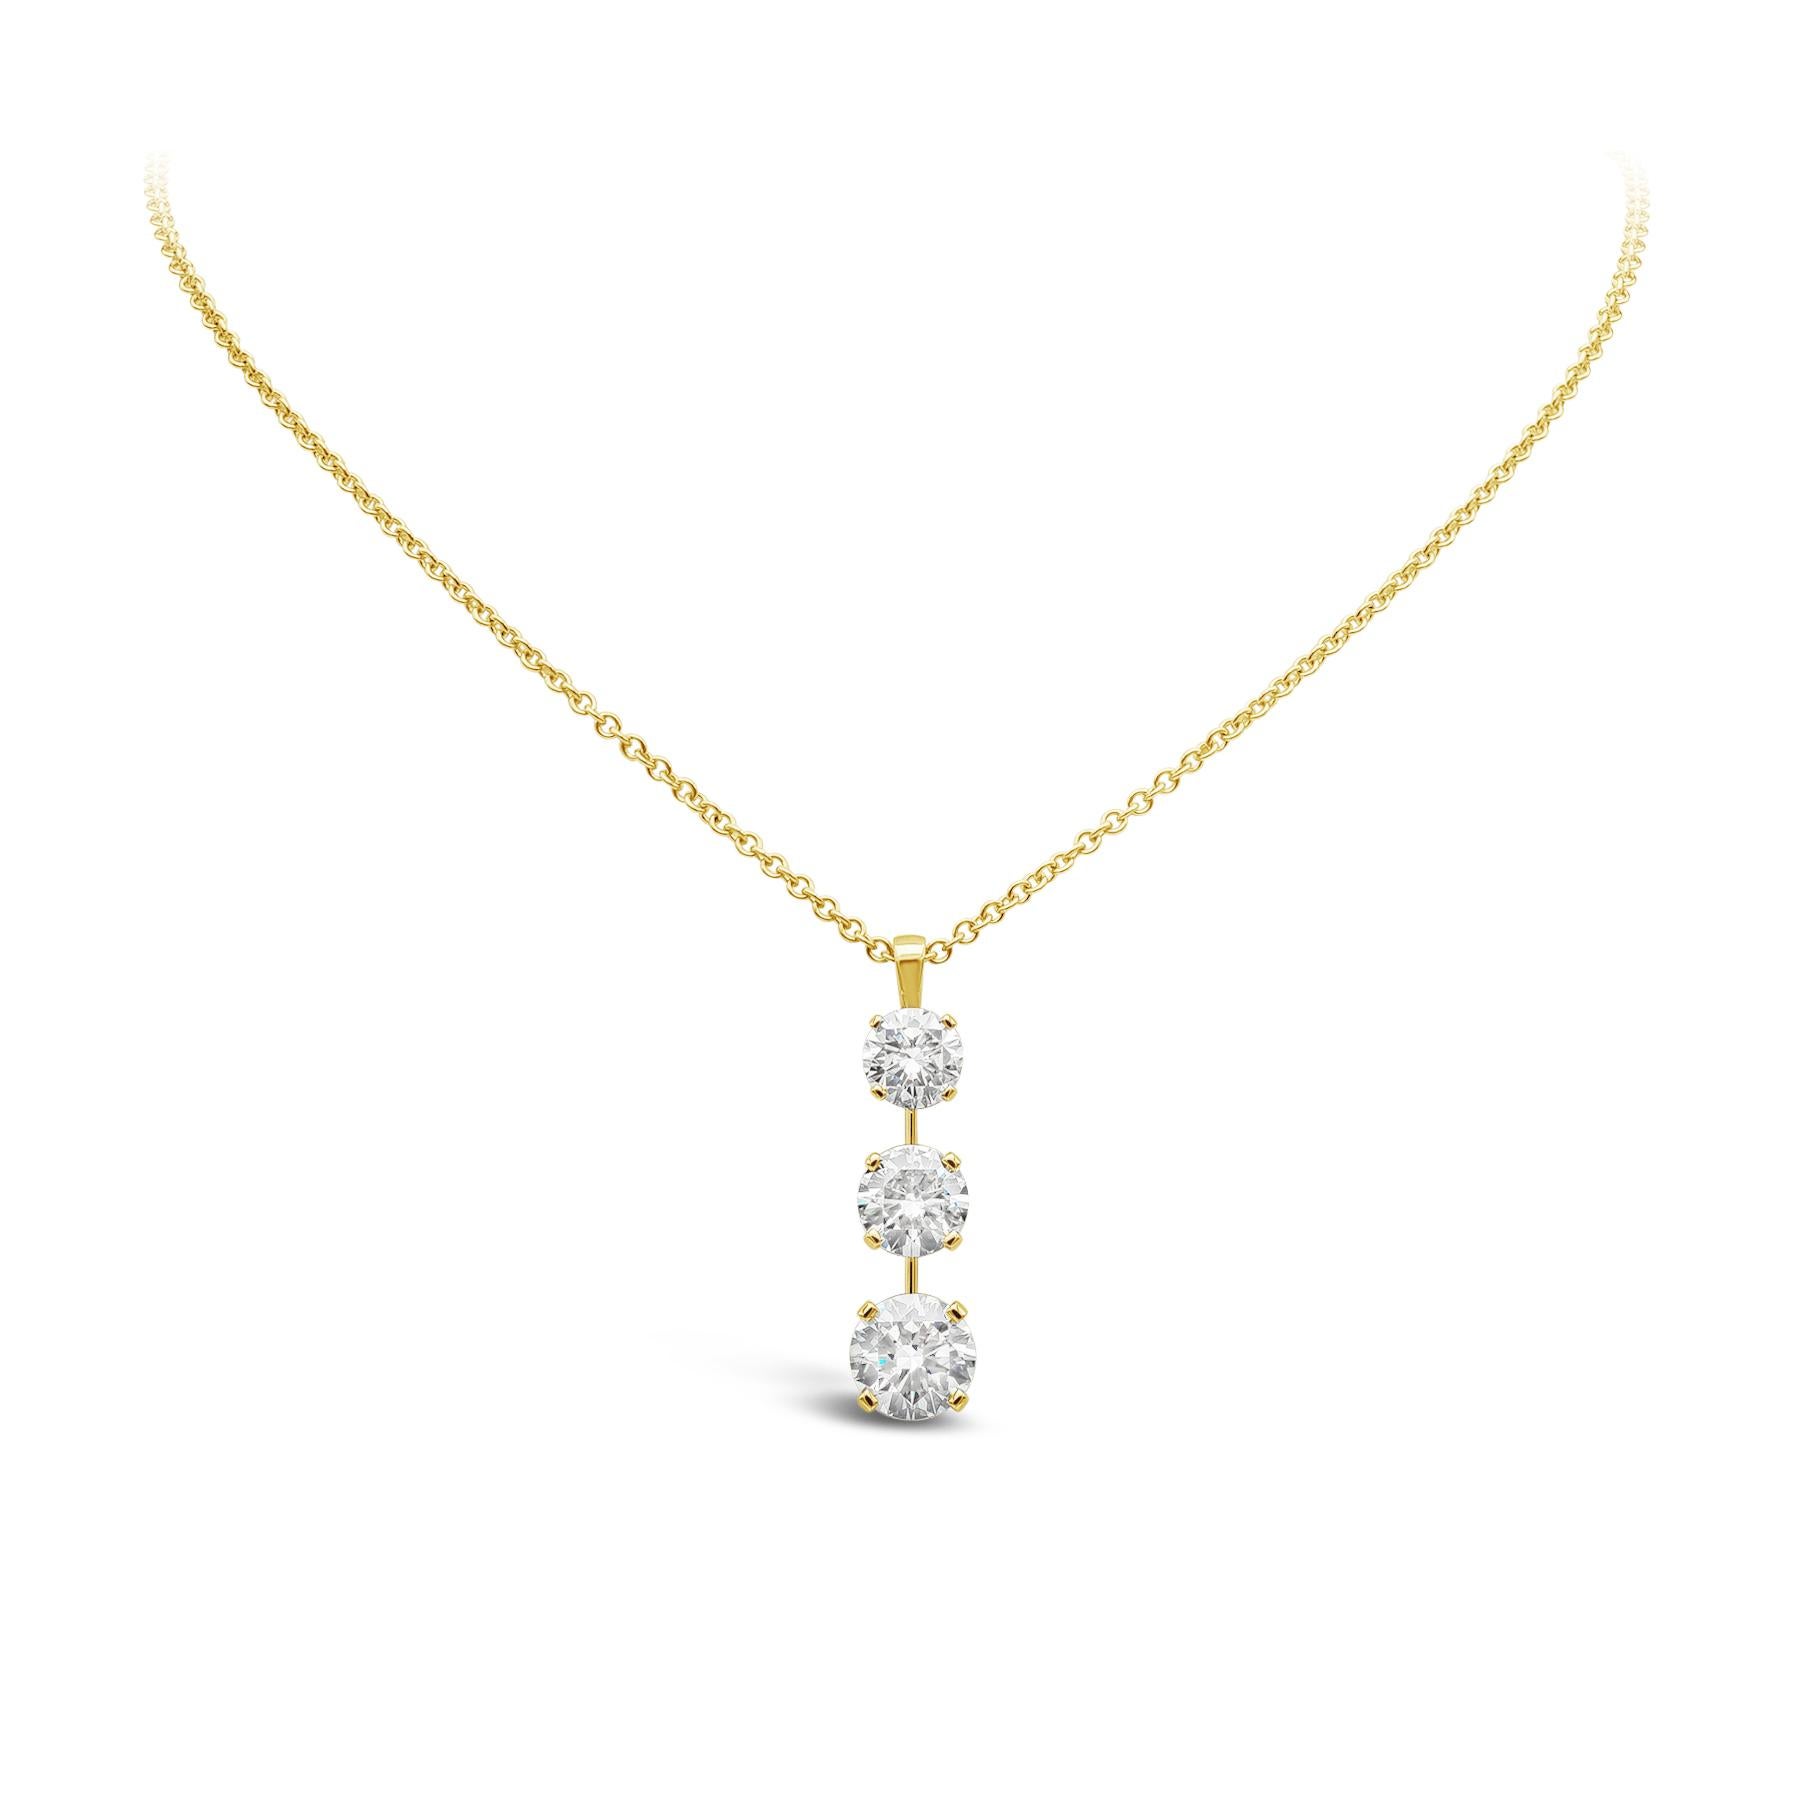 A beautiful drop necklace style showcasing three round brilliant diamonds graduating in size, set in a polished 18K yellow gold mounting. First diamond weighs 1.74 carats GIA certified as O-P color, SI2 in clarity . Second and third diamond weighs